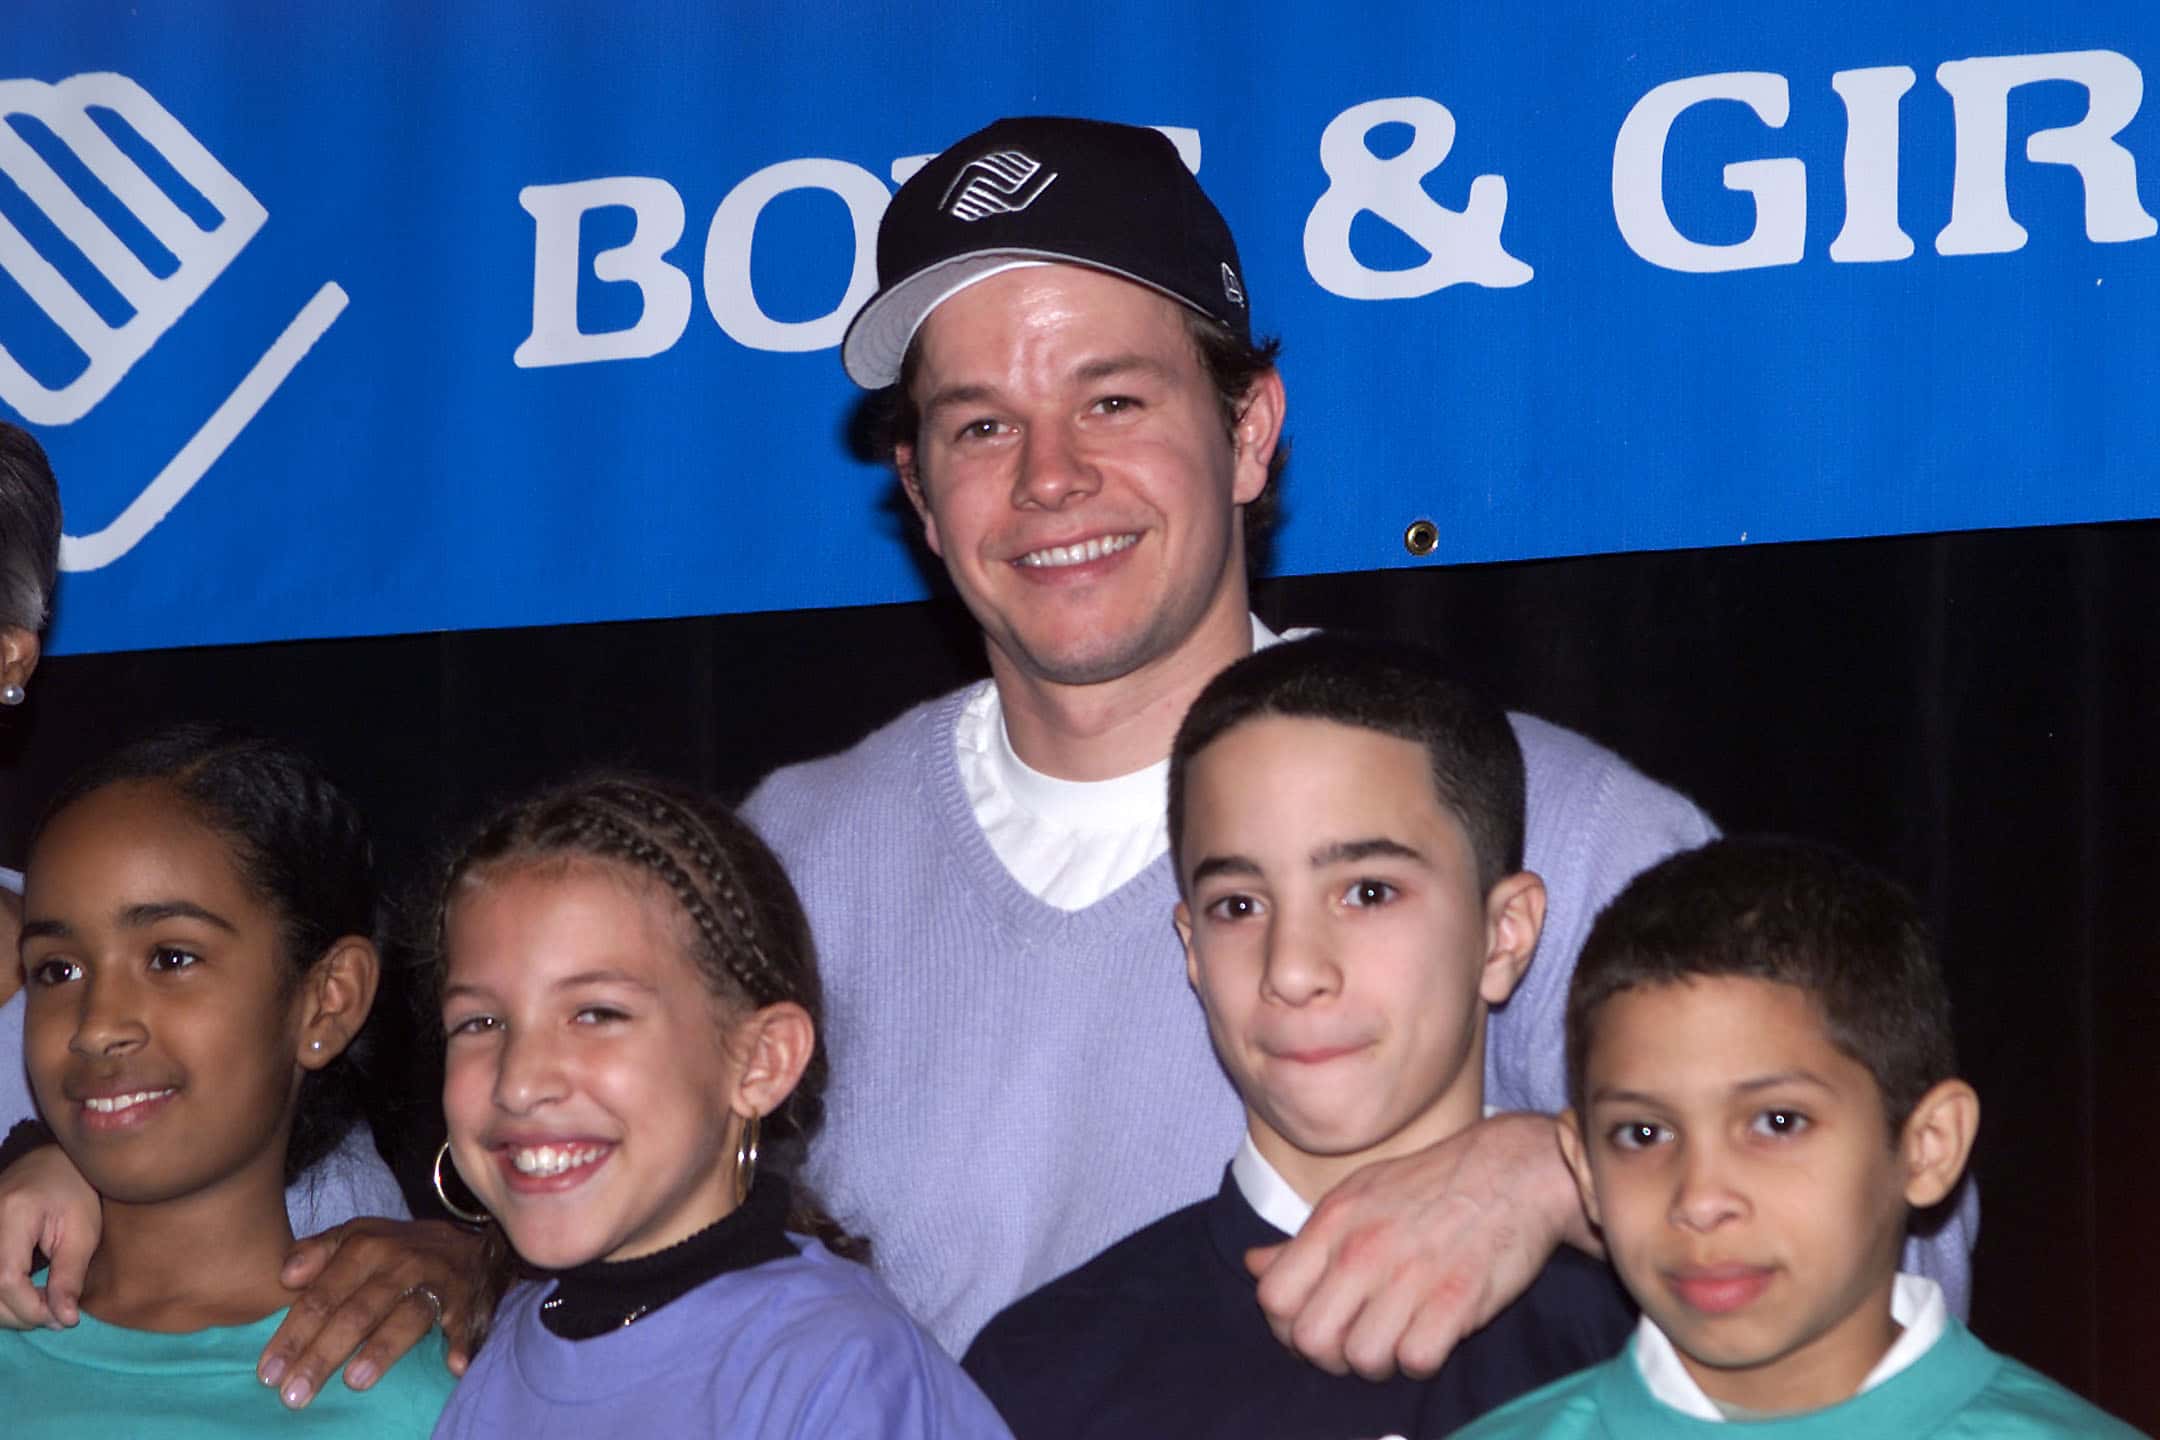 Mark Wahlberg facts